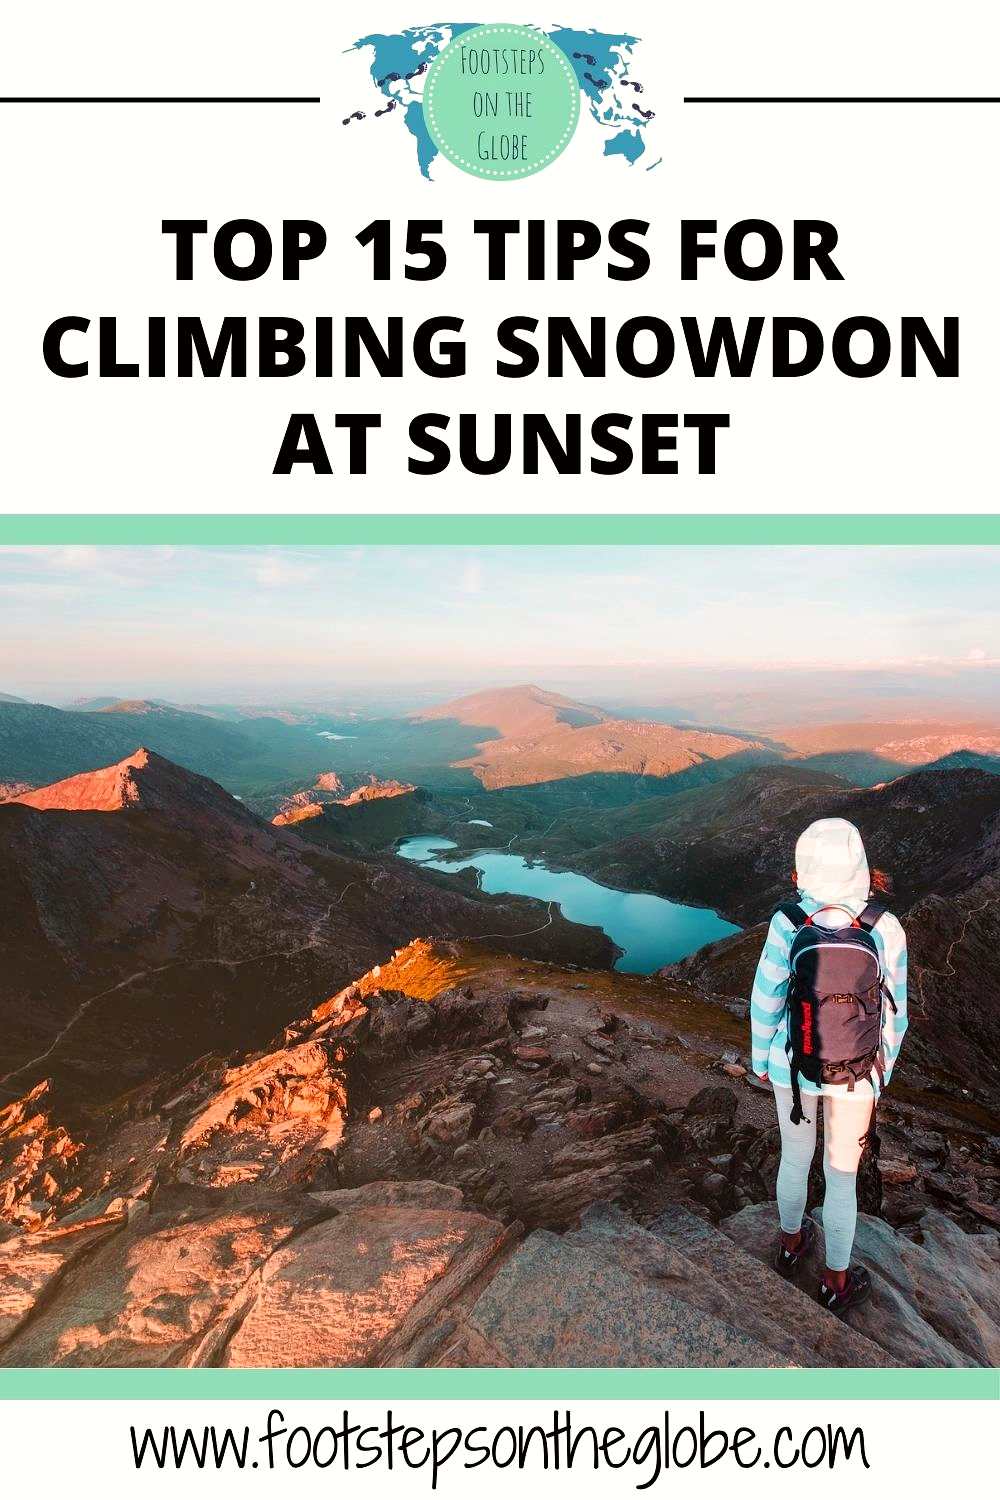 Pinterest image of a girl standing on the summit of Snowdon with a black backpack and hooded sweat shirt at sunset with the text: "Top 15 tips for climbing Snowdon at sunset".